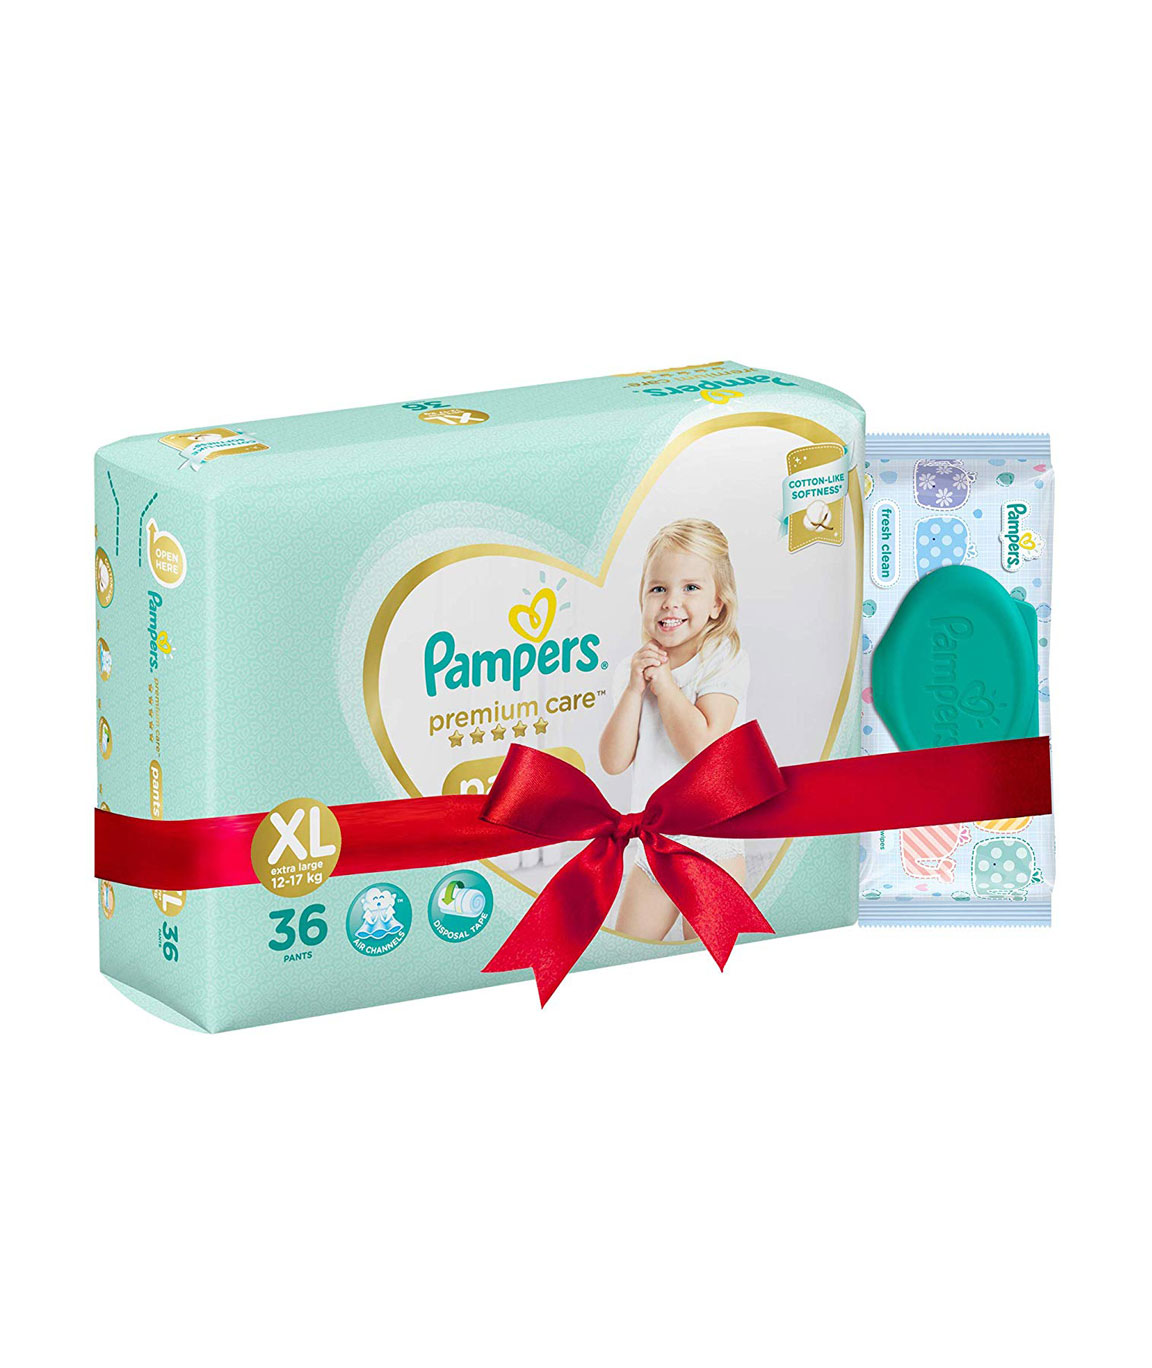 Diapers Pampers Premium Care XL 36 Pants - Softest Baby Diapers Extra Large  Size